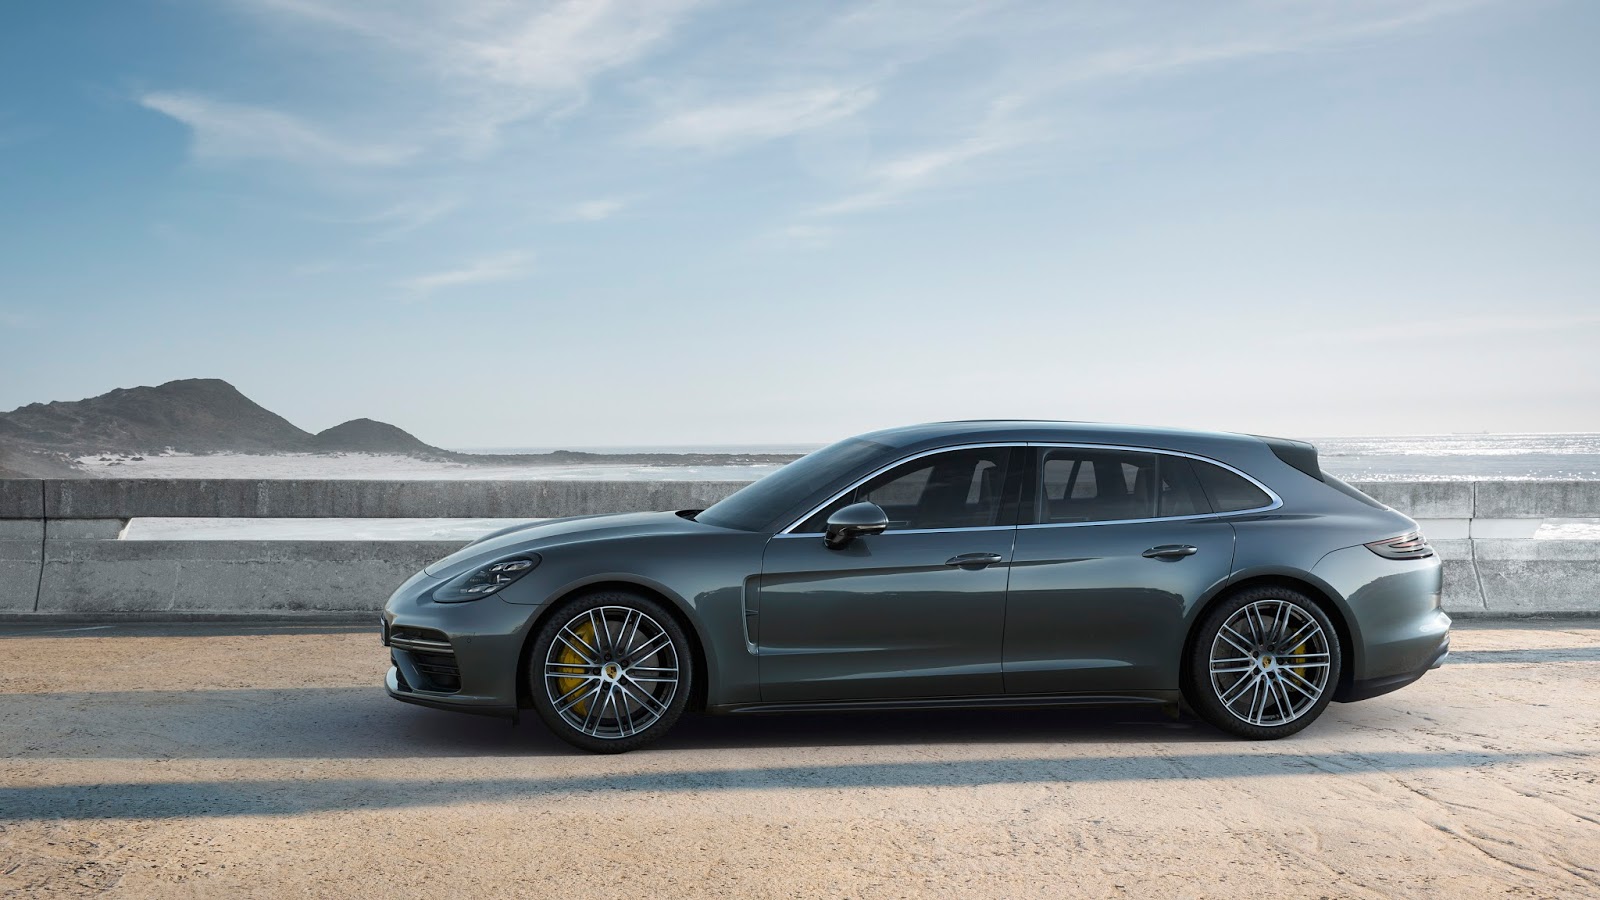 Porsche expands the Panamera line with a new station wagon. The Sport